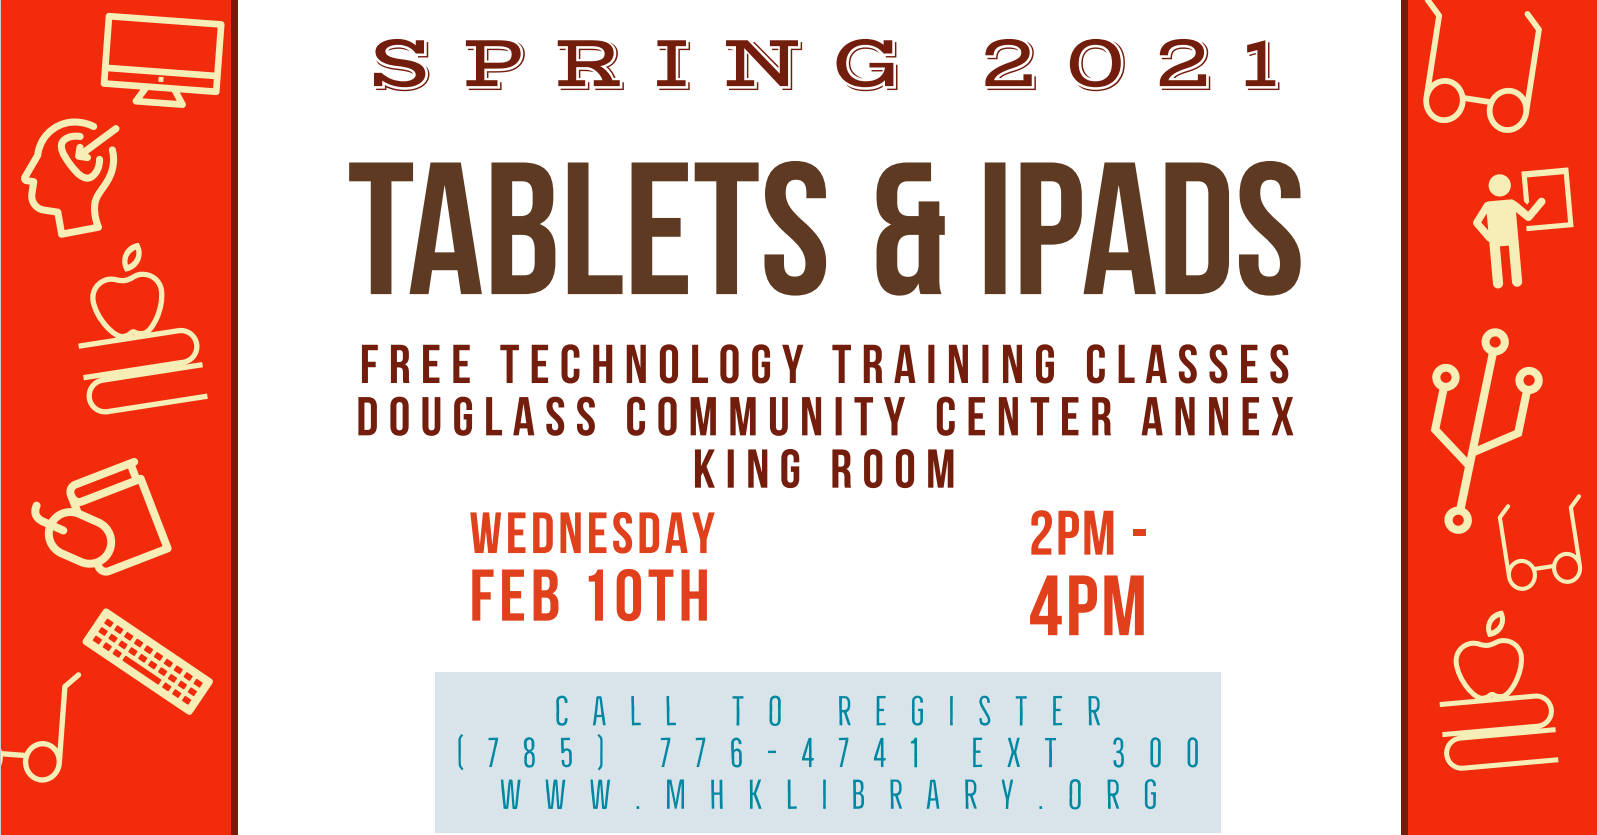 image of announcement of Douglass Center tech class, tablets and ipads